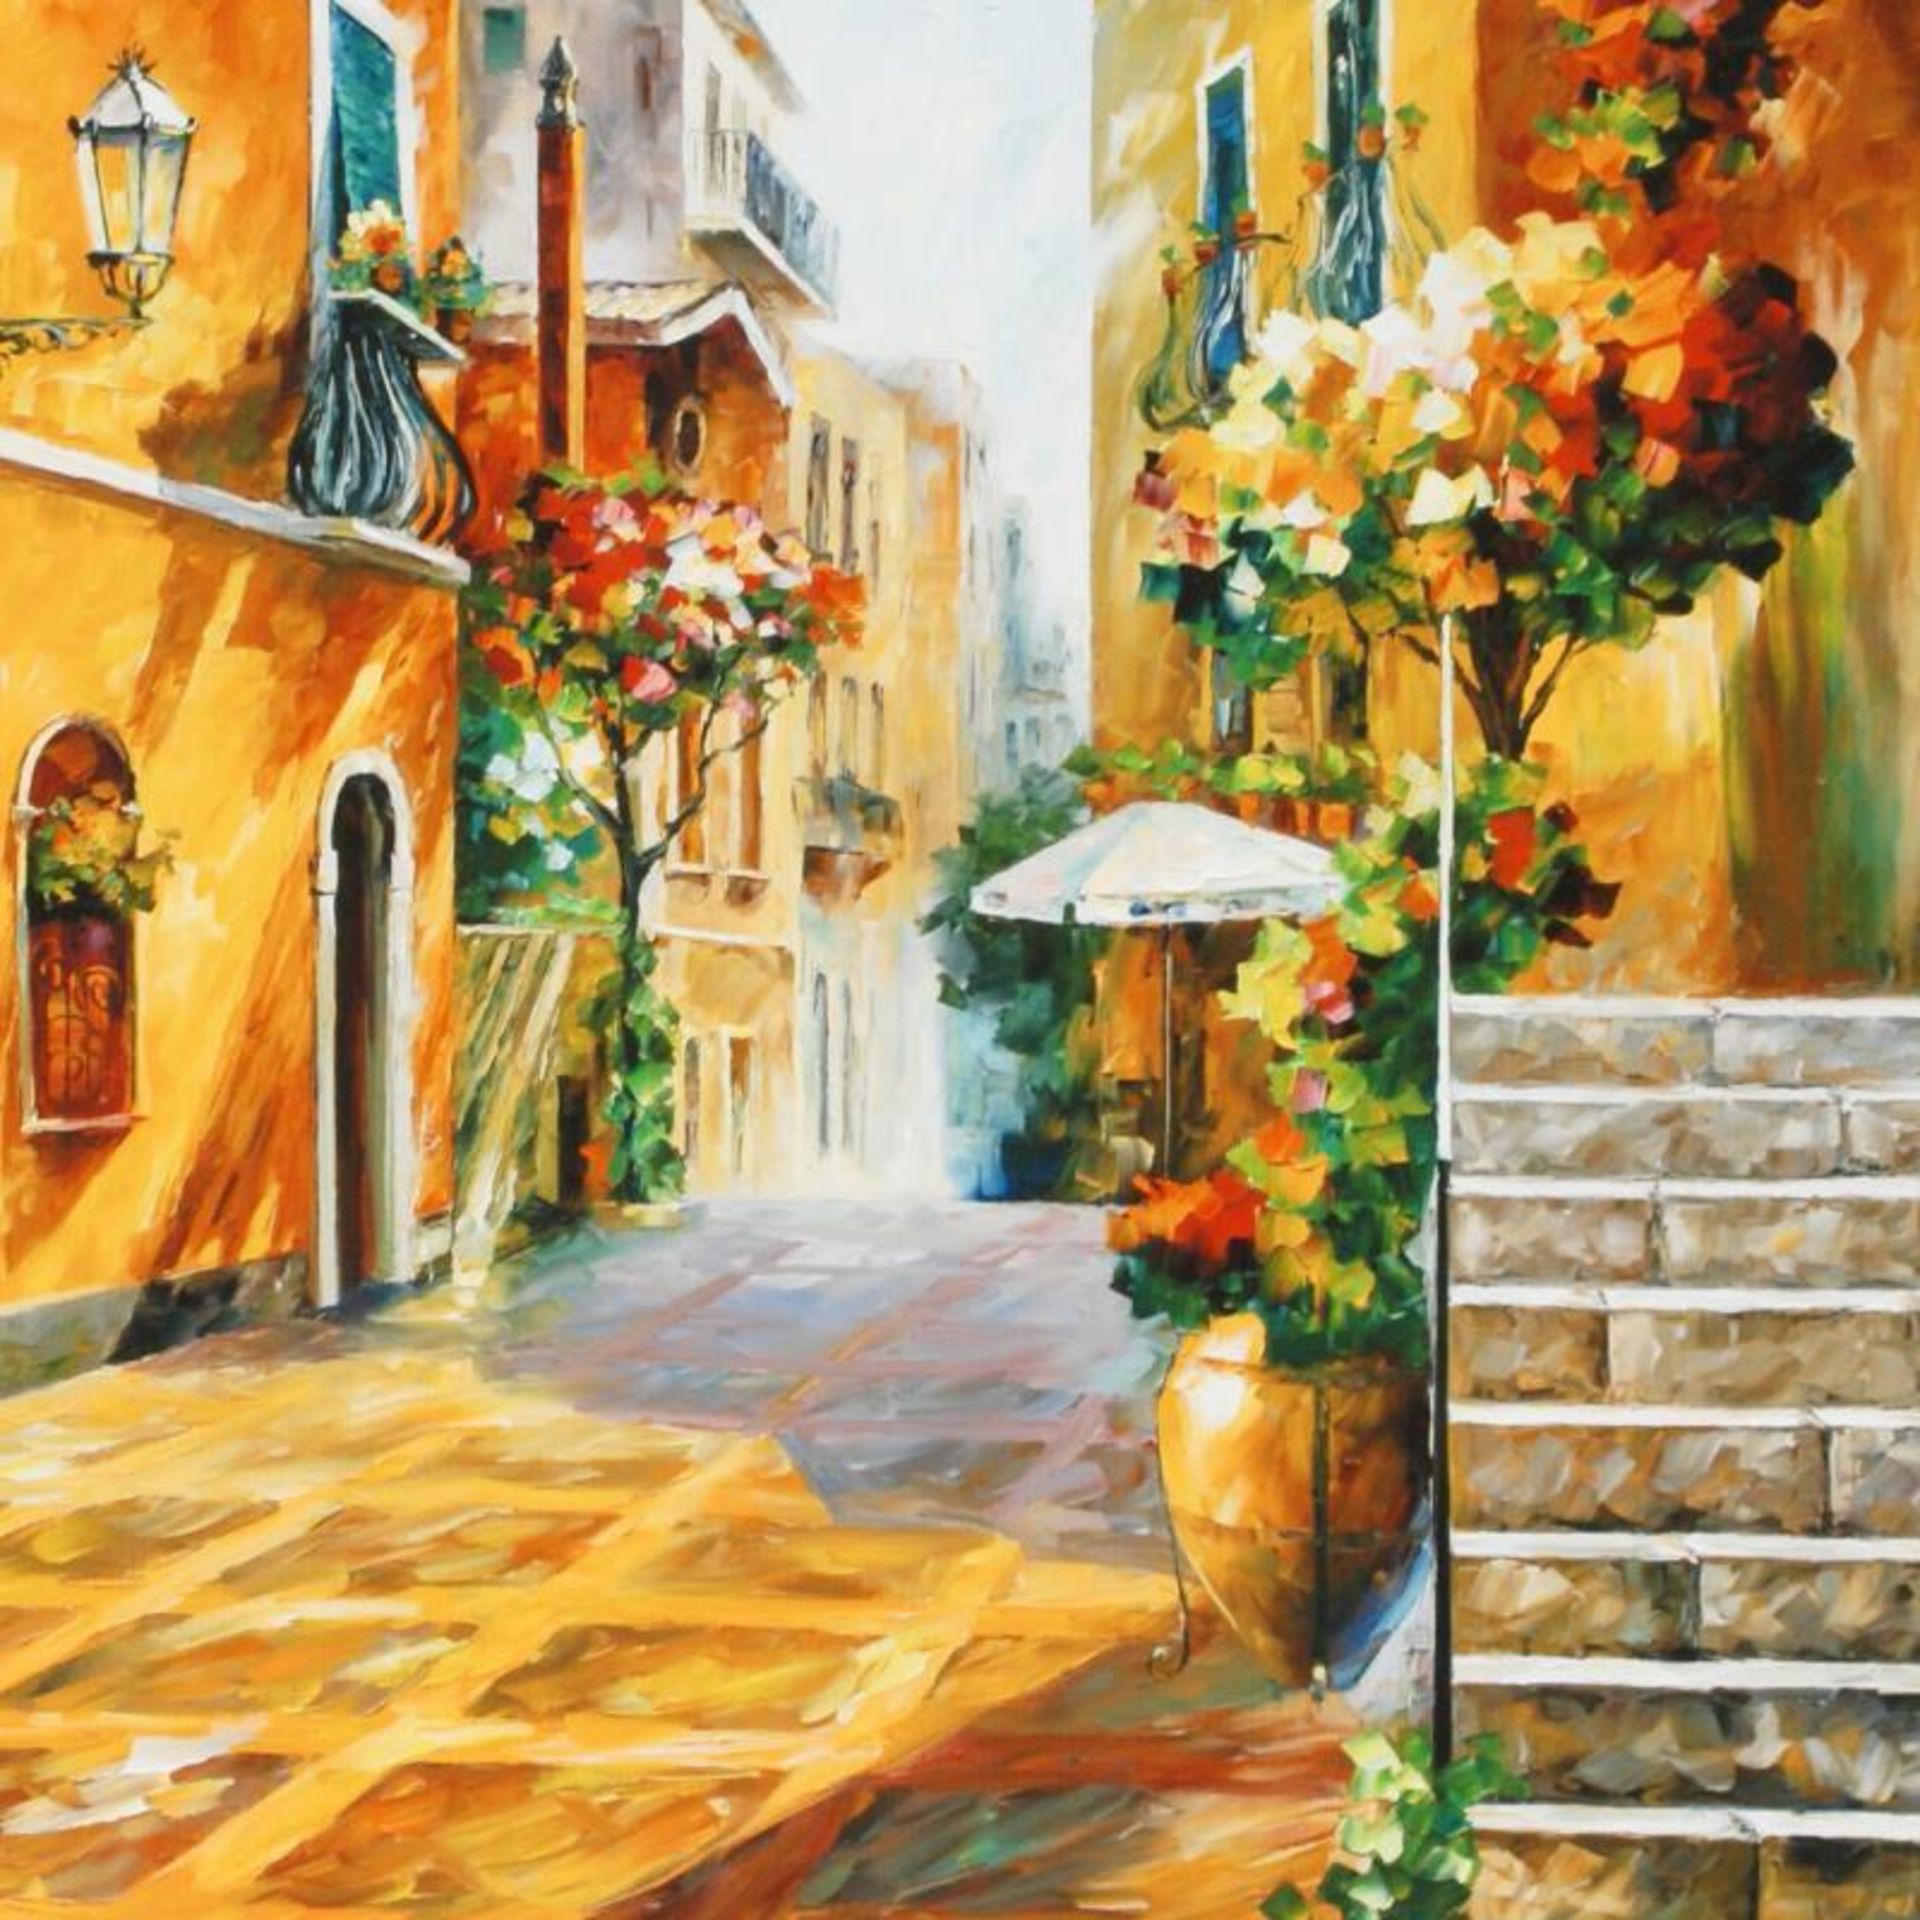 Leonid Afremov (1955-2019) "The Sun of Sicily" Limited Edition Giclee on Canvas, - Image 2 of 3